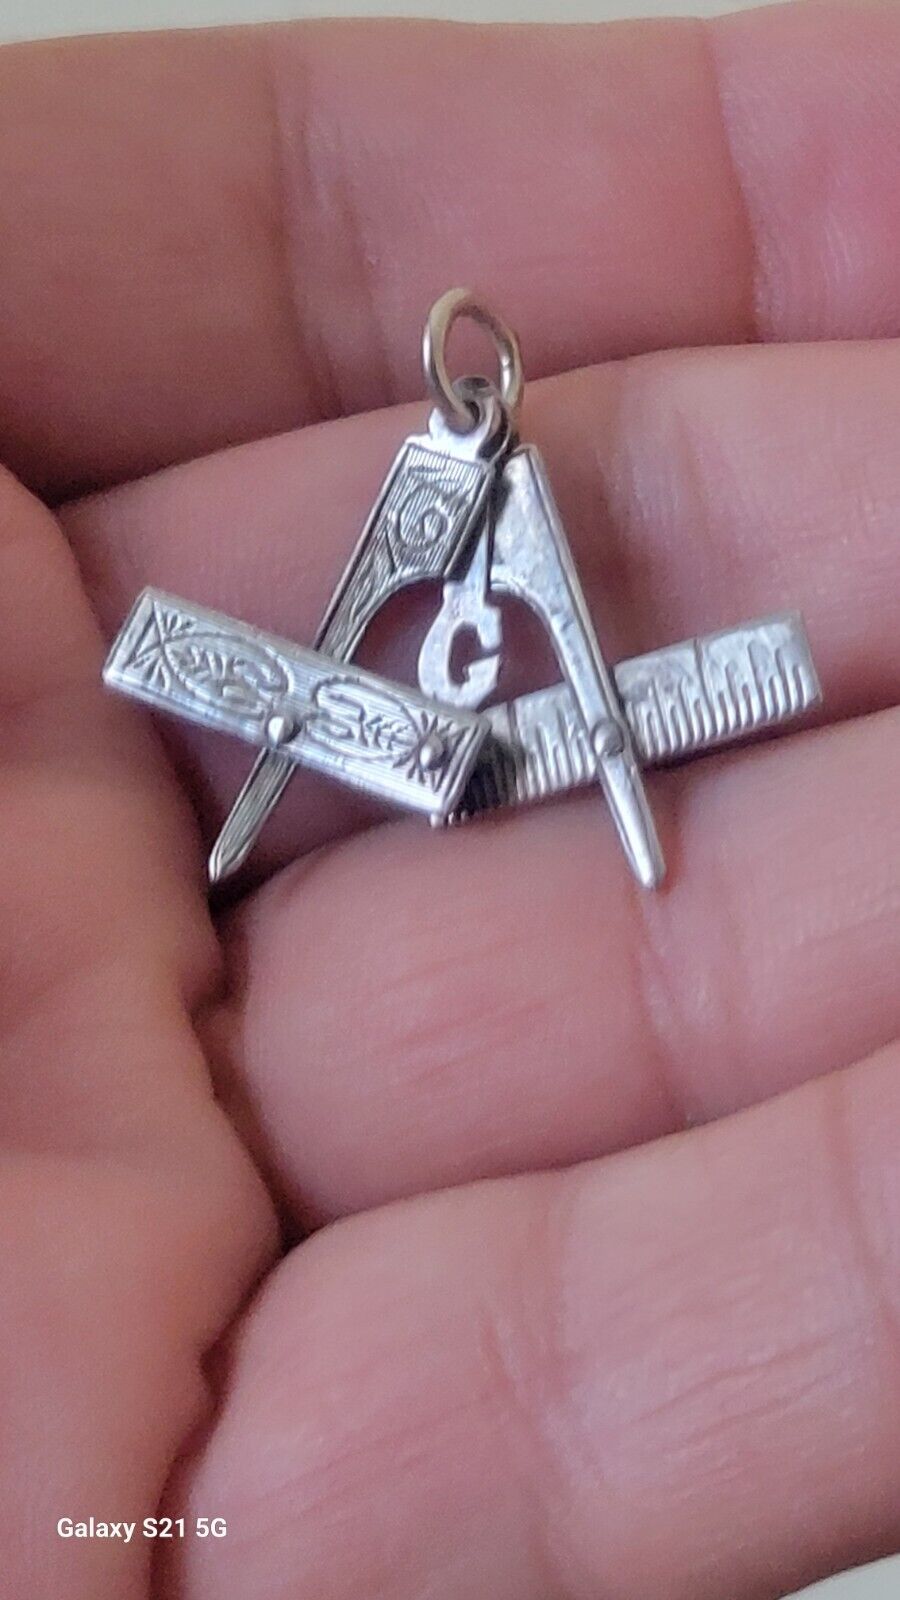 Masonic Symbol Fob Charm Pendant Sterling Silver Articulated c1920 with Deco Box